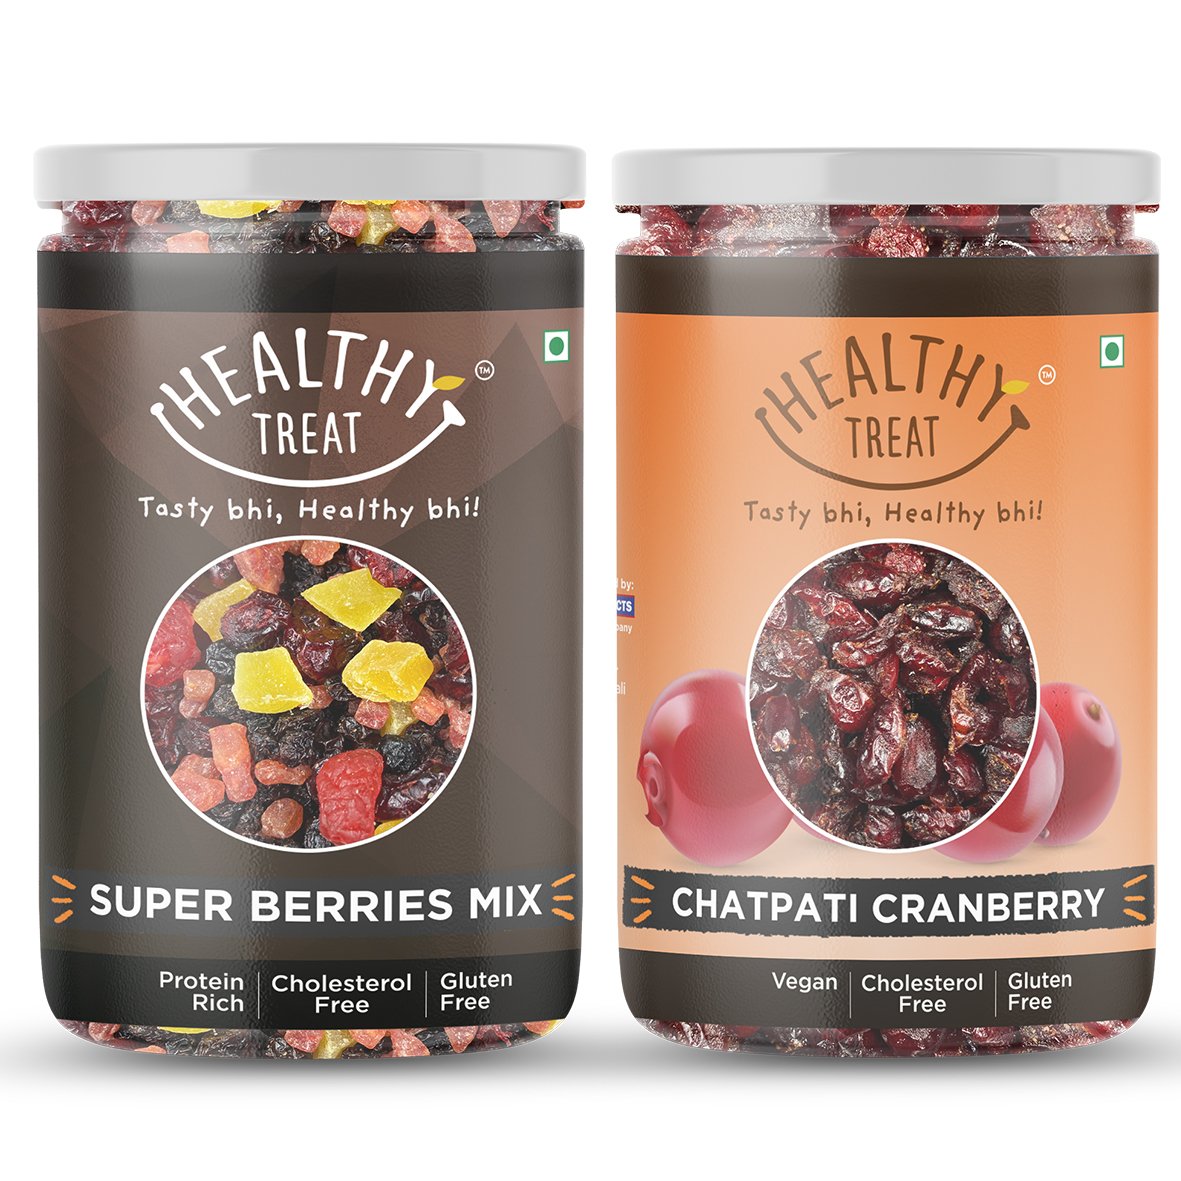 Super Berries Mix and Chatpati Cranberry Combo.